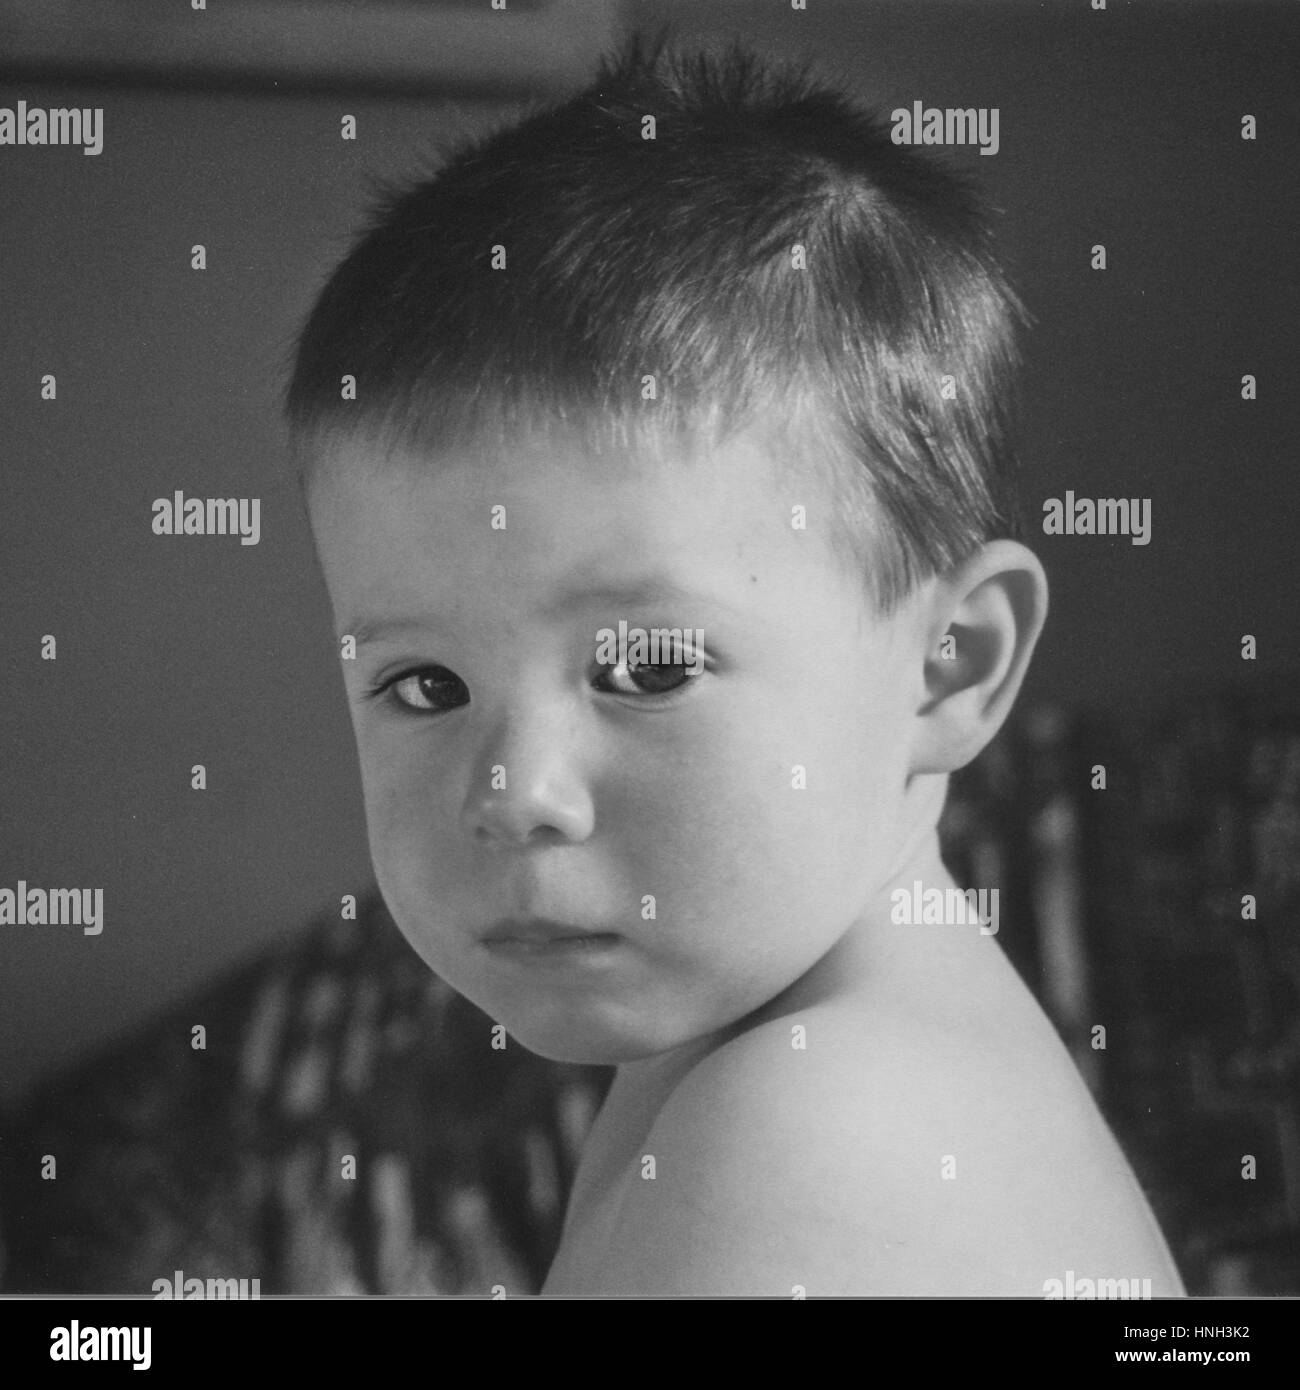 Head and shoulder shot of toddler looking sad anxious downcast forlorn lonely in black and white Stock Photo